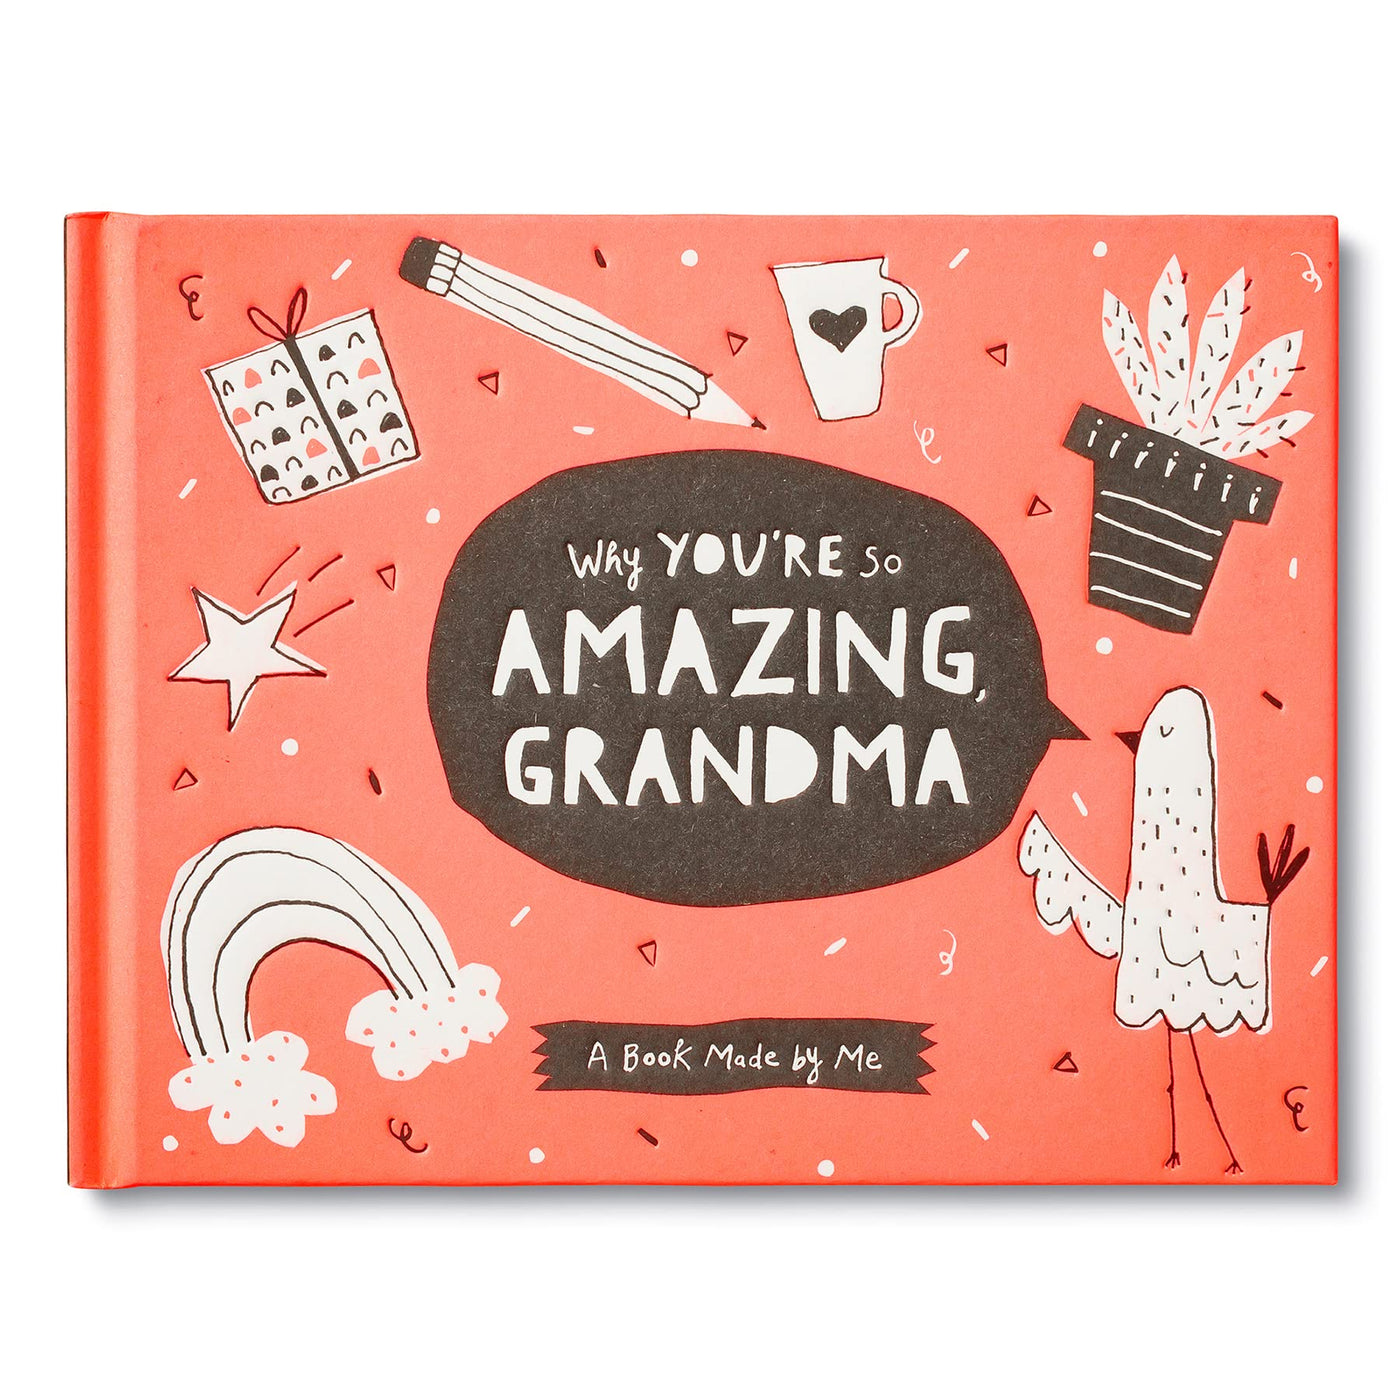 Why You're So Amazing Grandma Fill-In the Blank Book